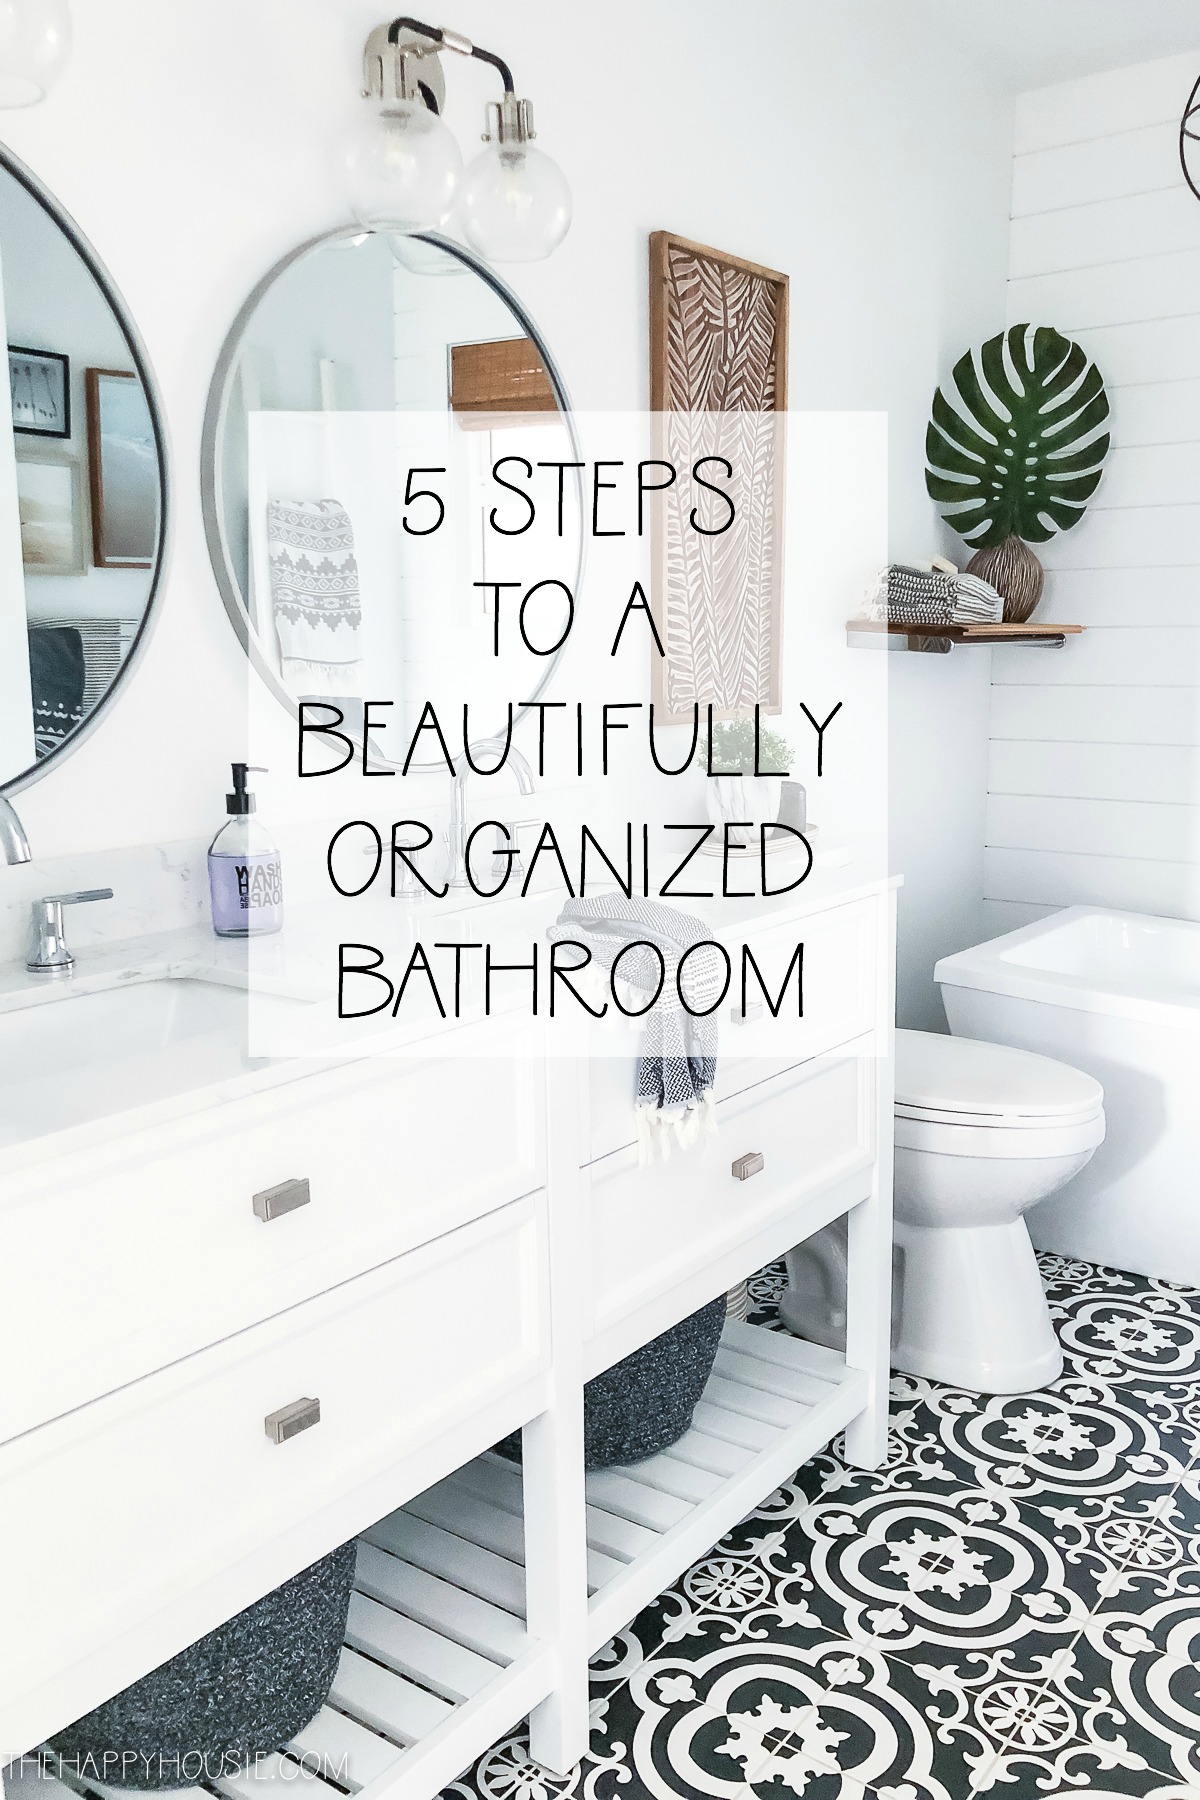 5 Steps To A Beautifully Organized Bathroom graphic.